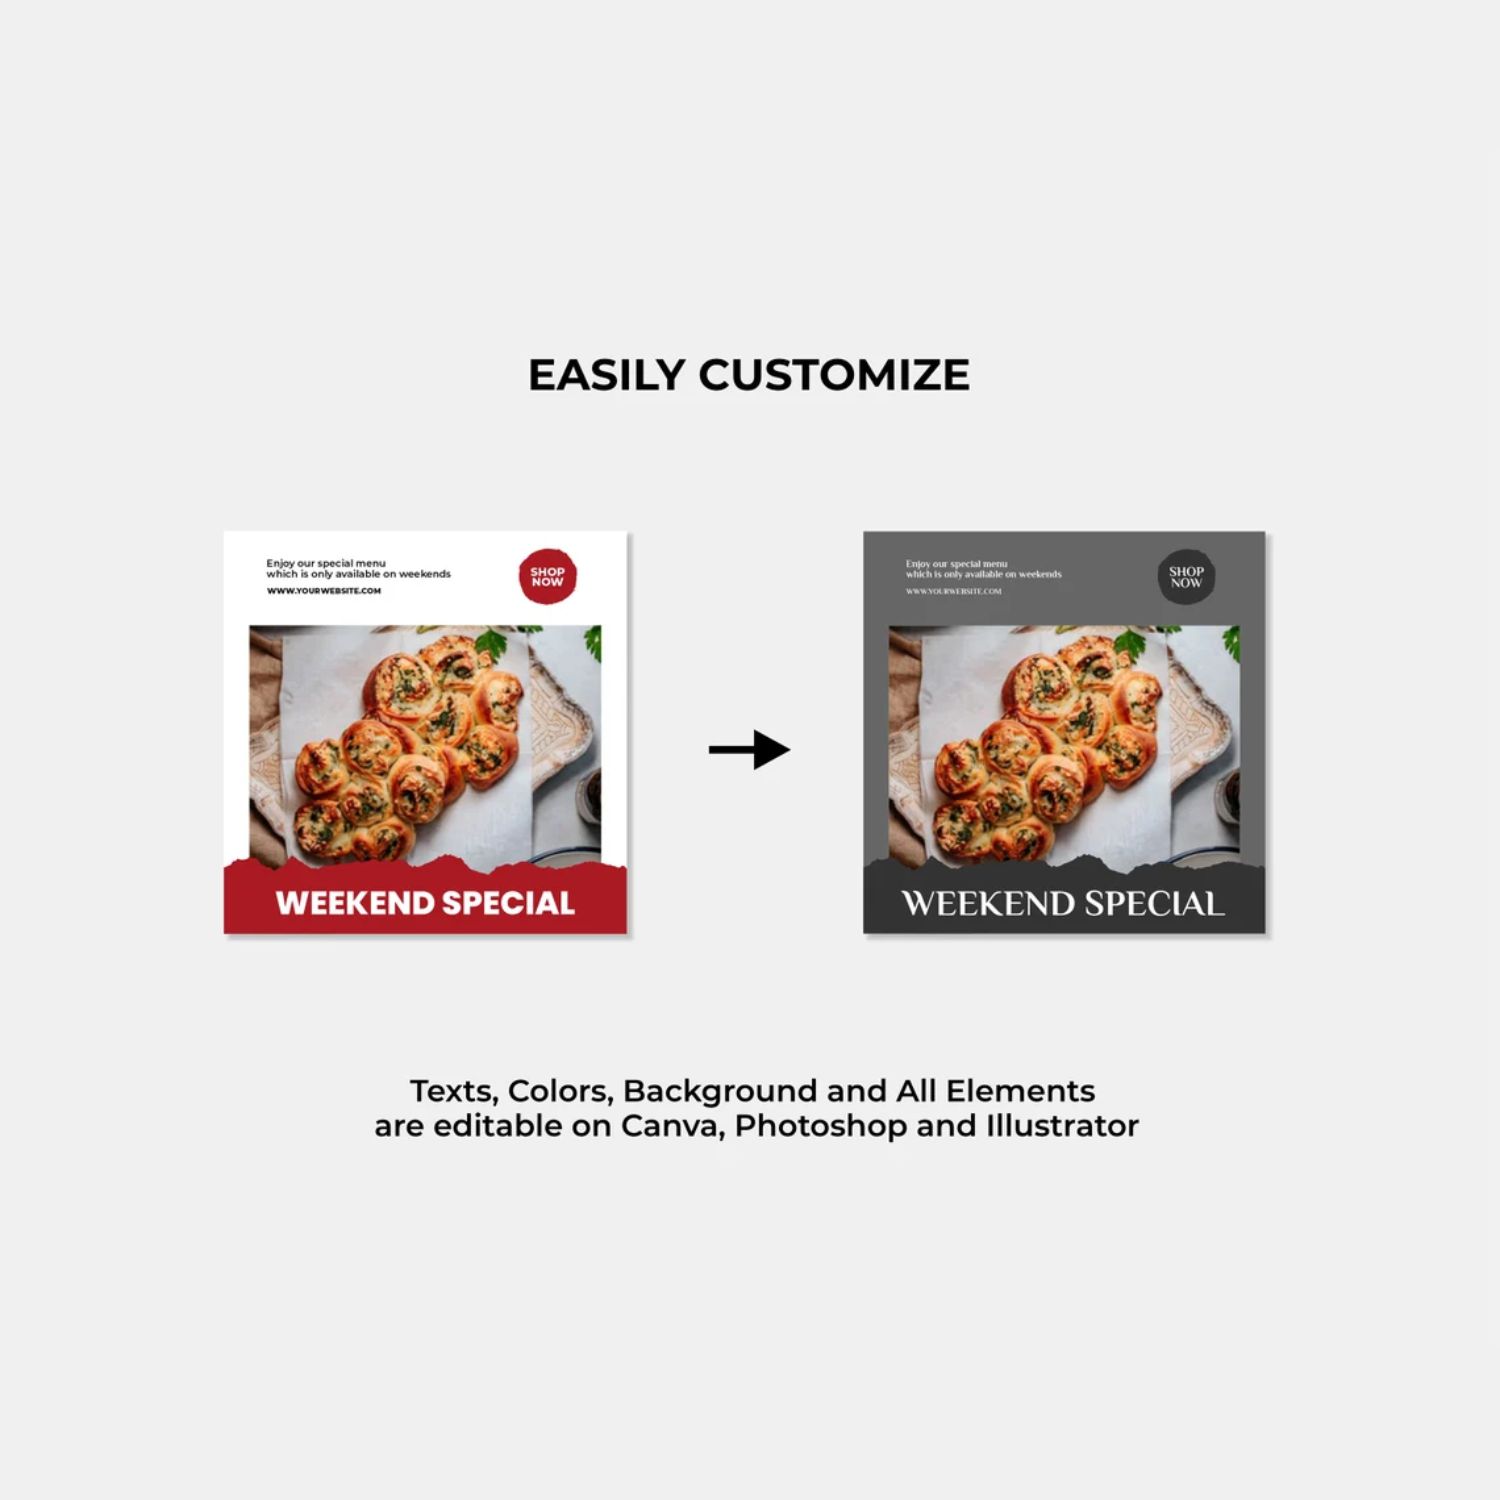 Food & Beverage Social Media Marketing Templates Before And After.